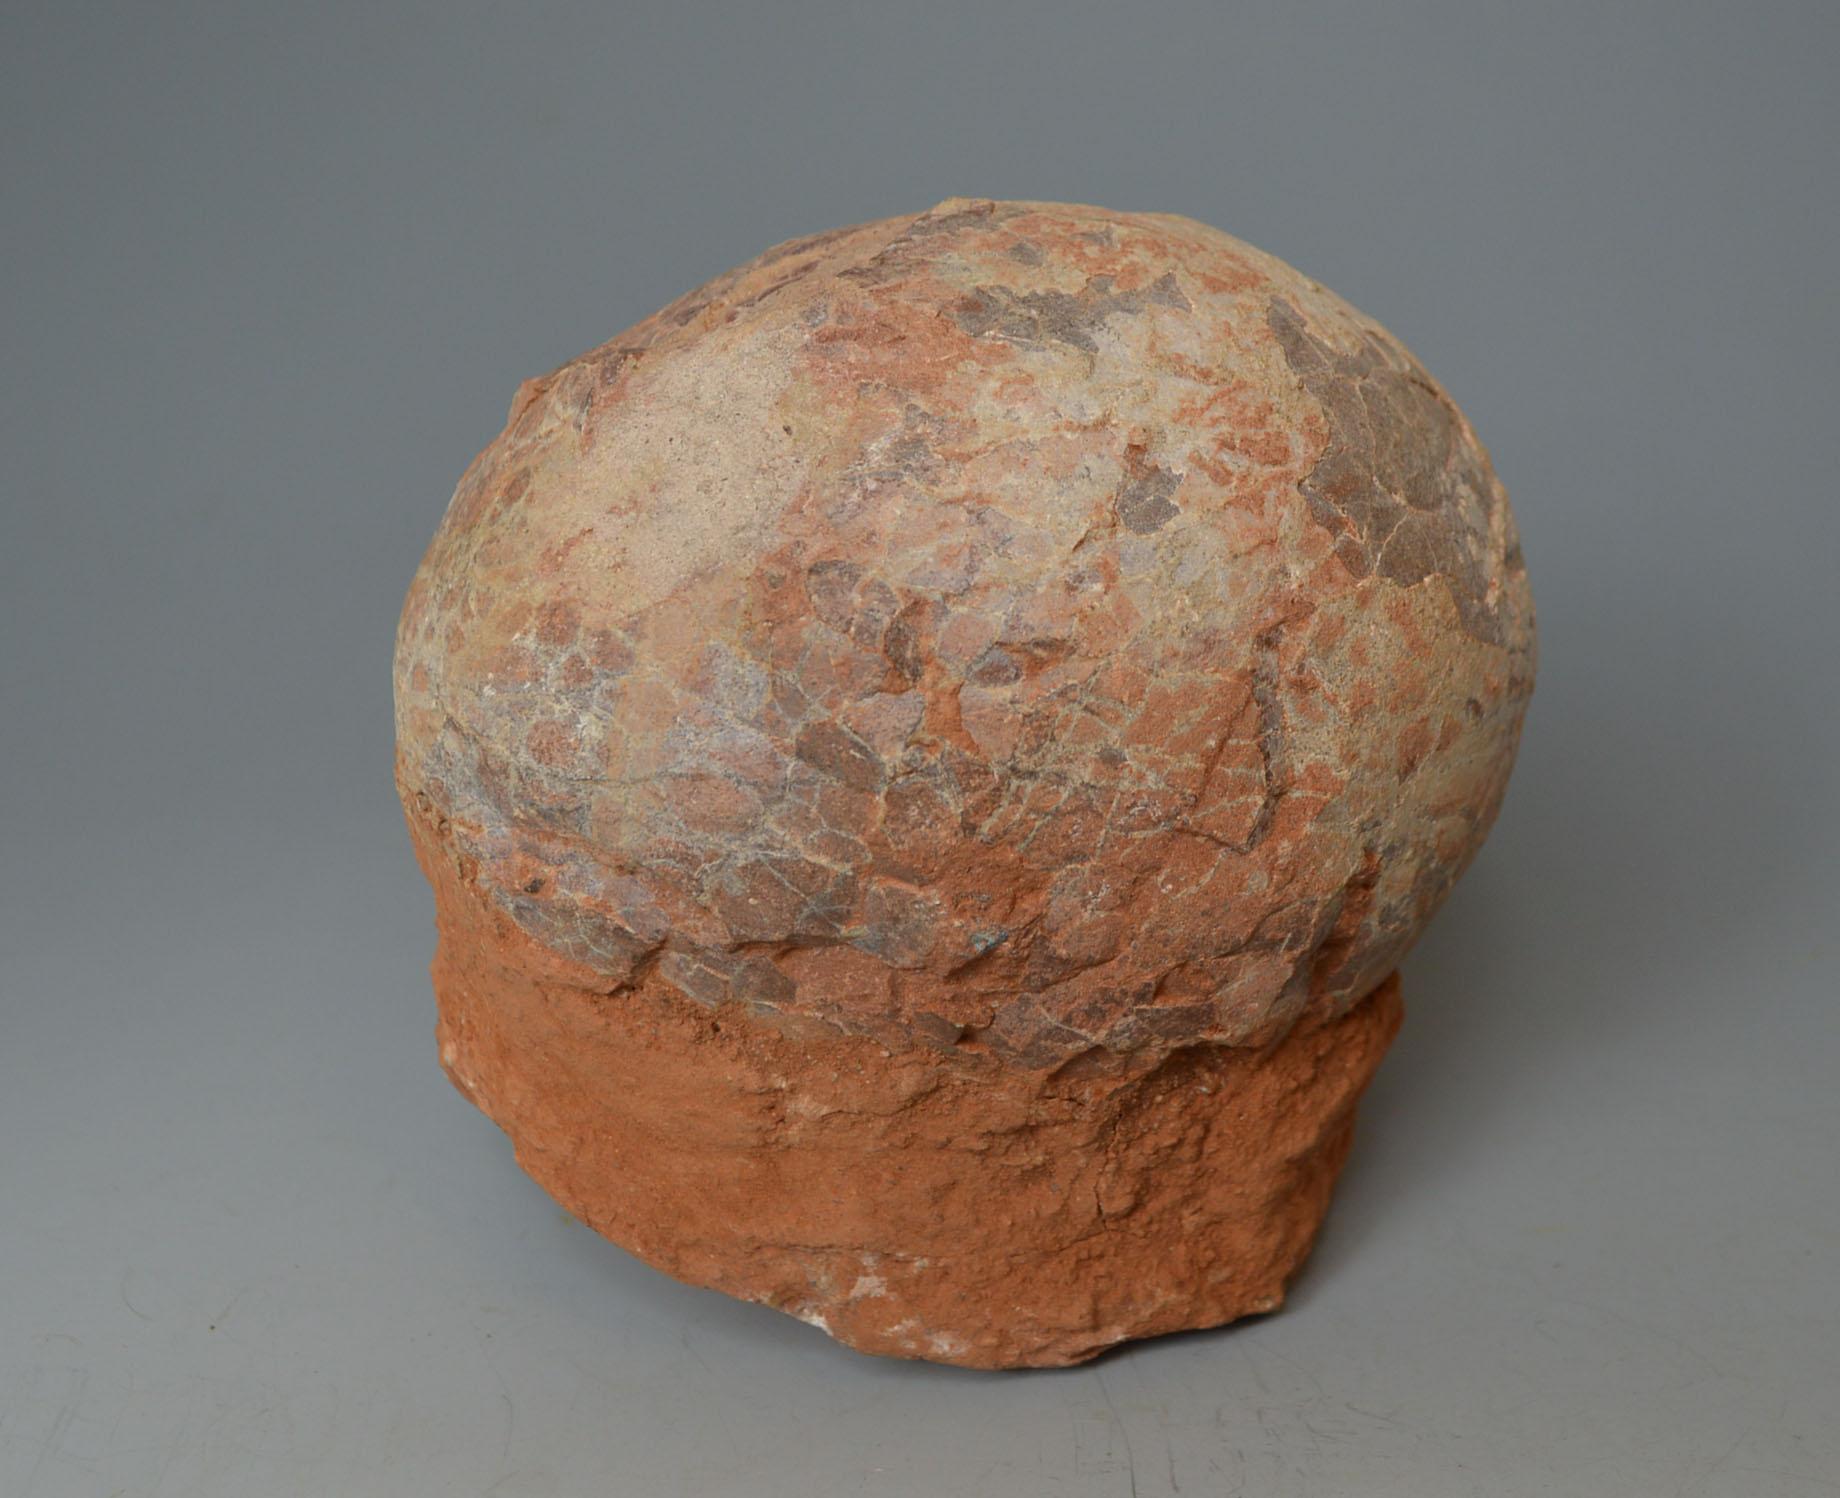 Large Fossilized Hadrosaur dinosaur egg circa 70/80 Million Years
A superb example of a late Cretaceous (circa 70/80 Million years ago) fossilized egg of a Hadrosaur Dinosaur.
The Hadrosaurus belongs to a group of large plant eating dinosaurs that